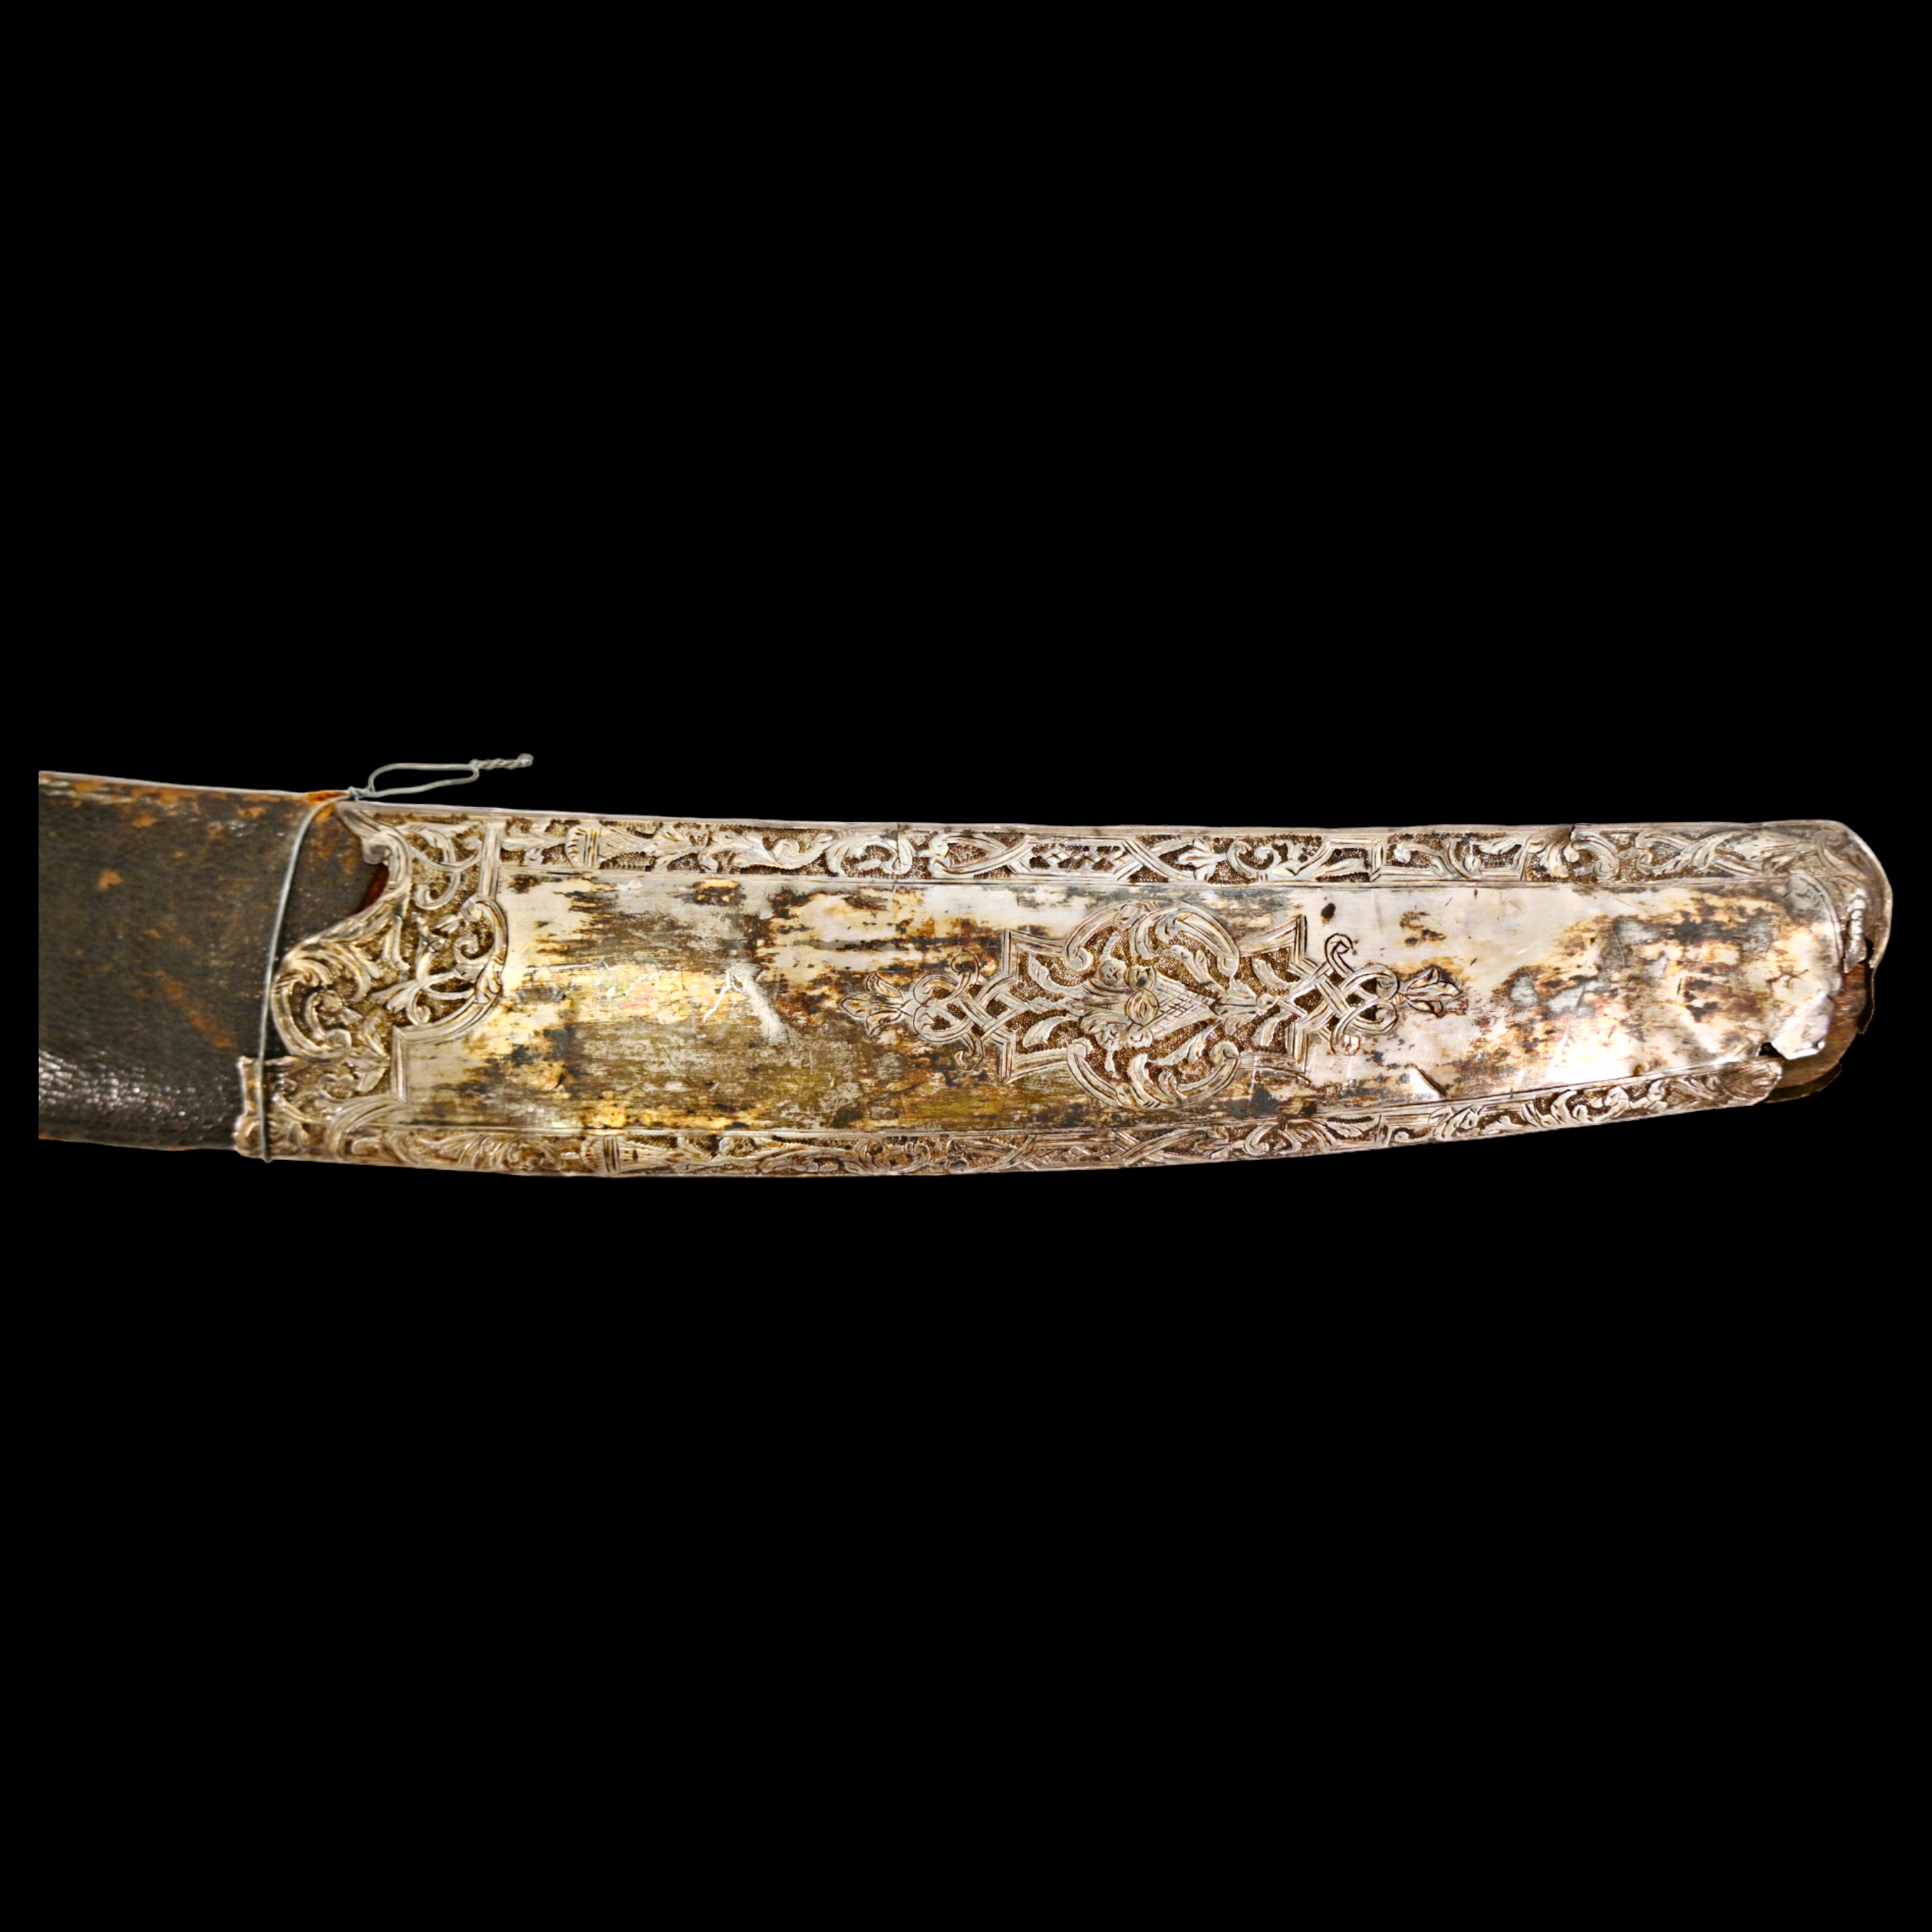 Rare Ottoman saber KARABELA, wootz blade, silver with the tugra of Sultan Ahmed III, early 18th C. - Image 6 of 27